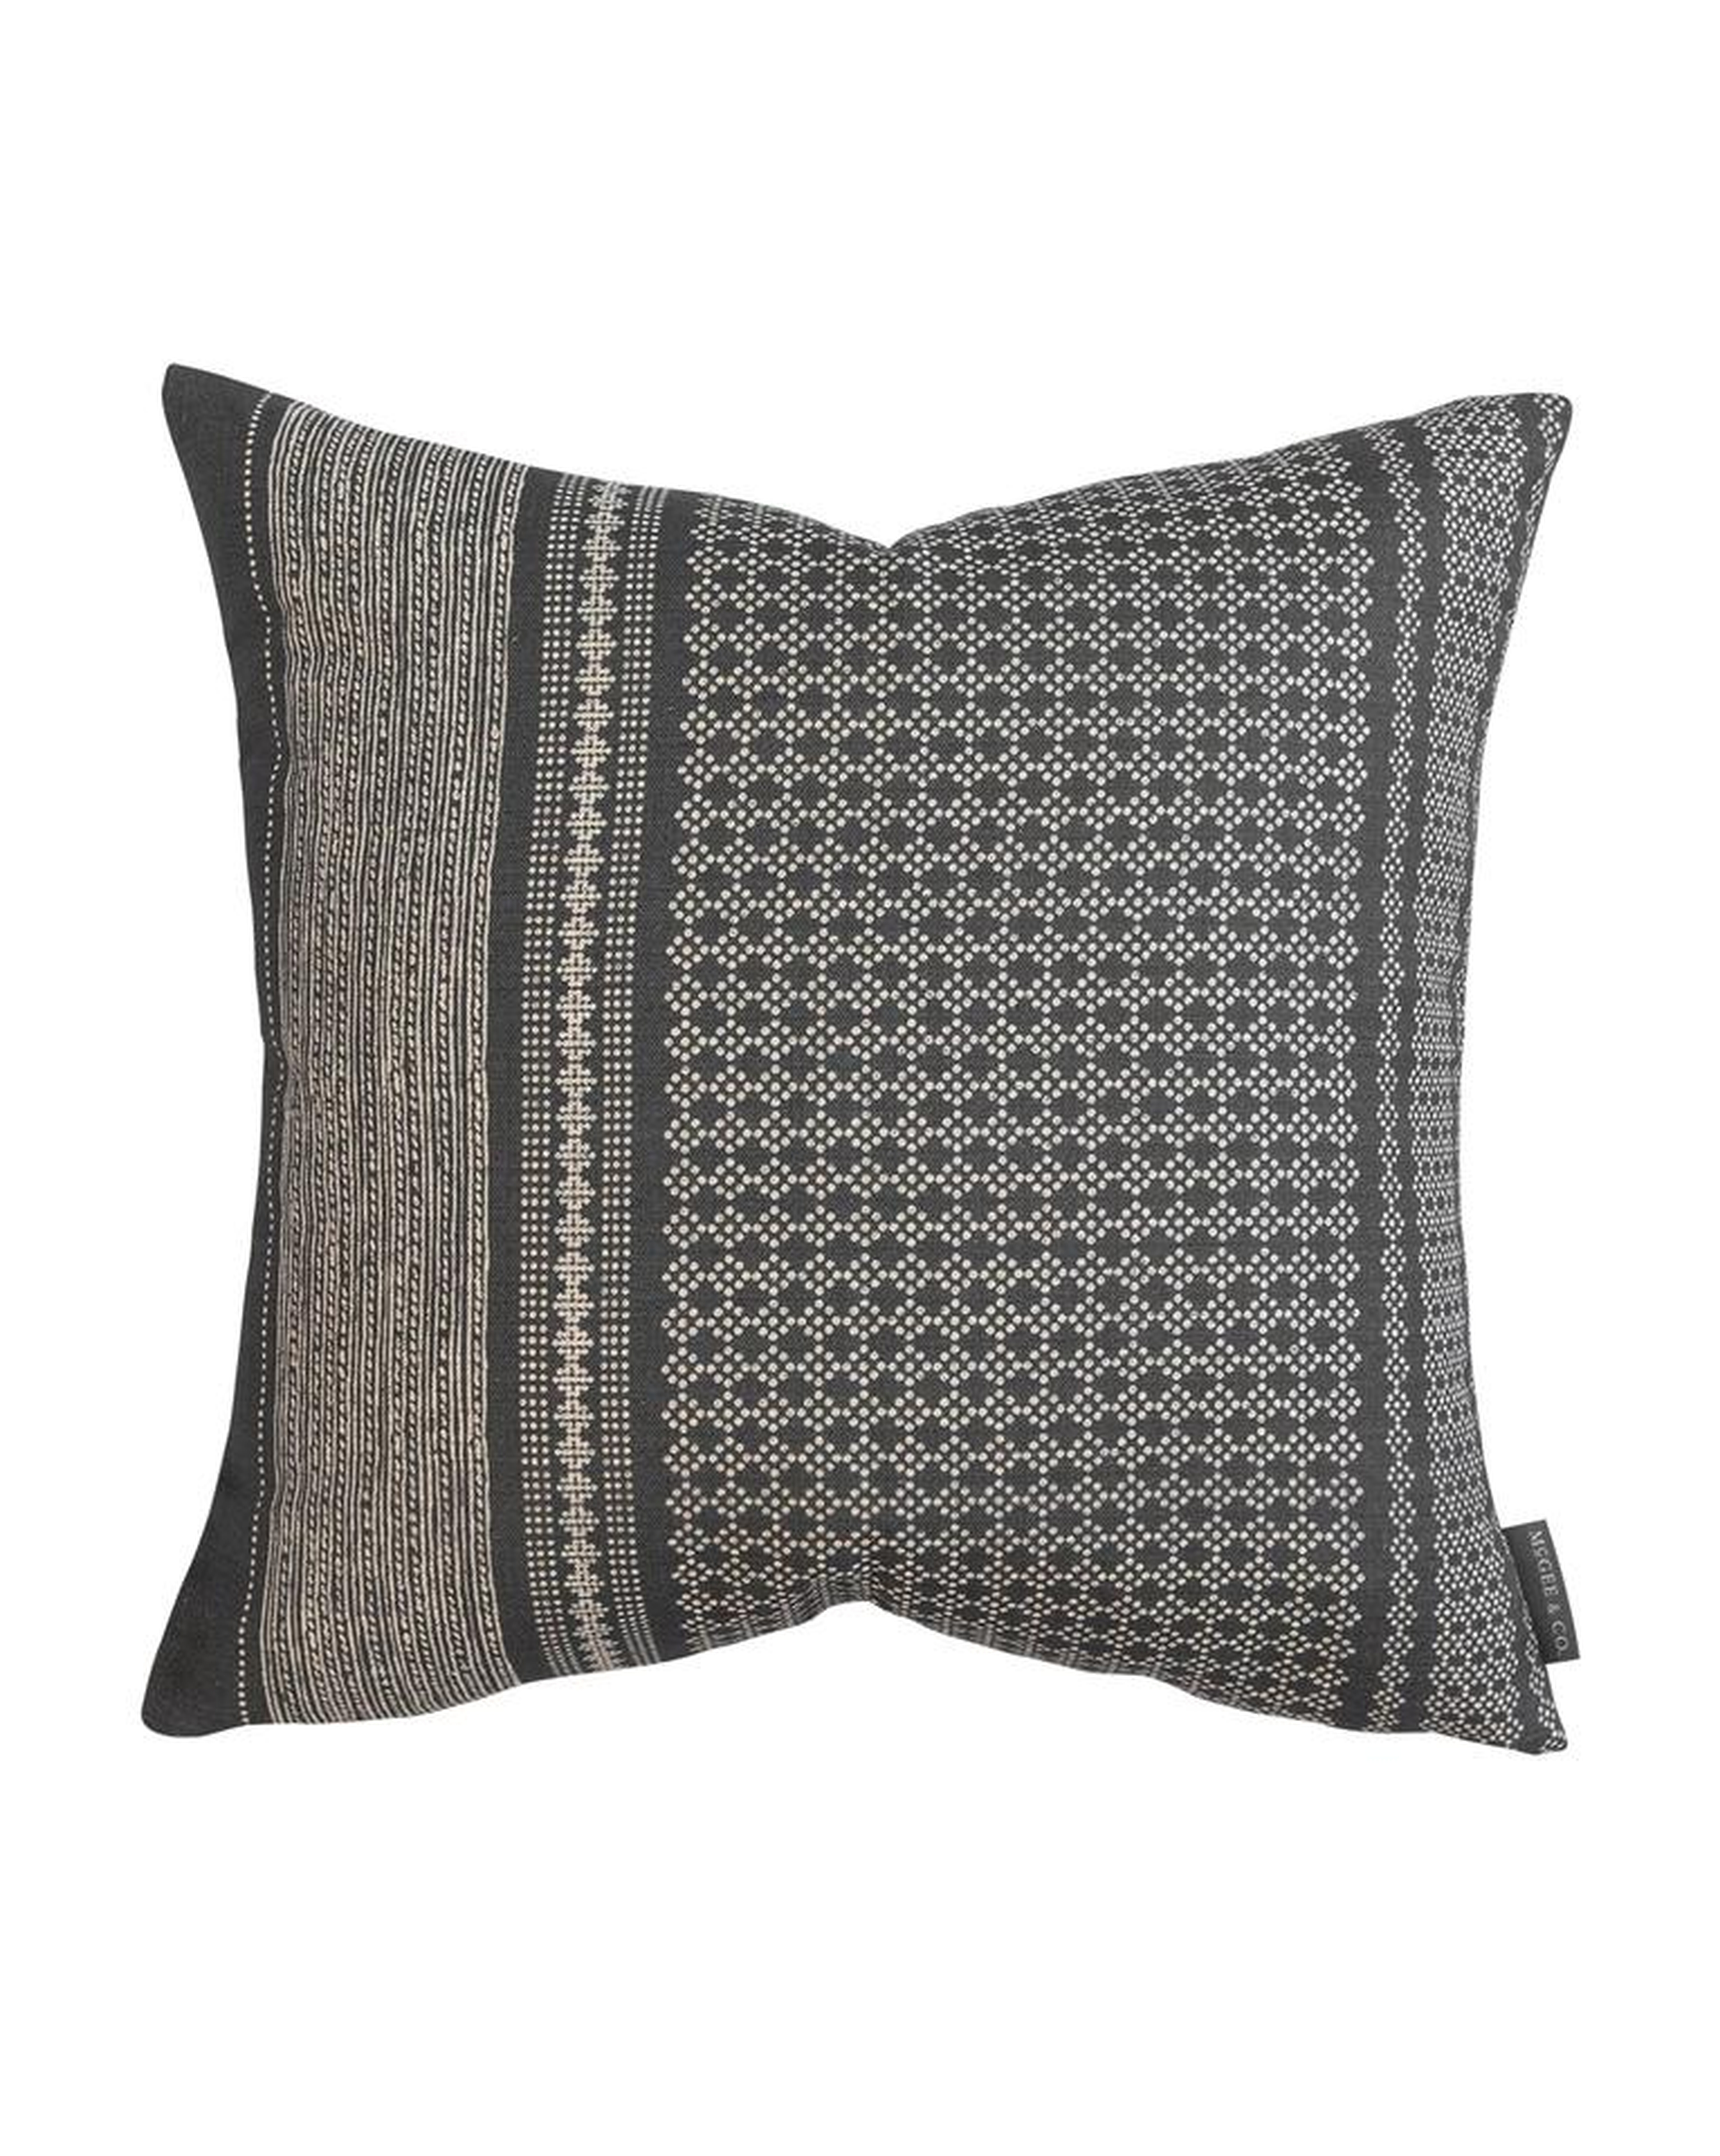 ELLEN DOTTED PRINT PILLOW COVER - McGee & Co.